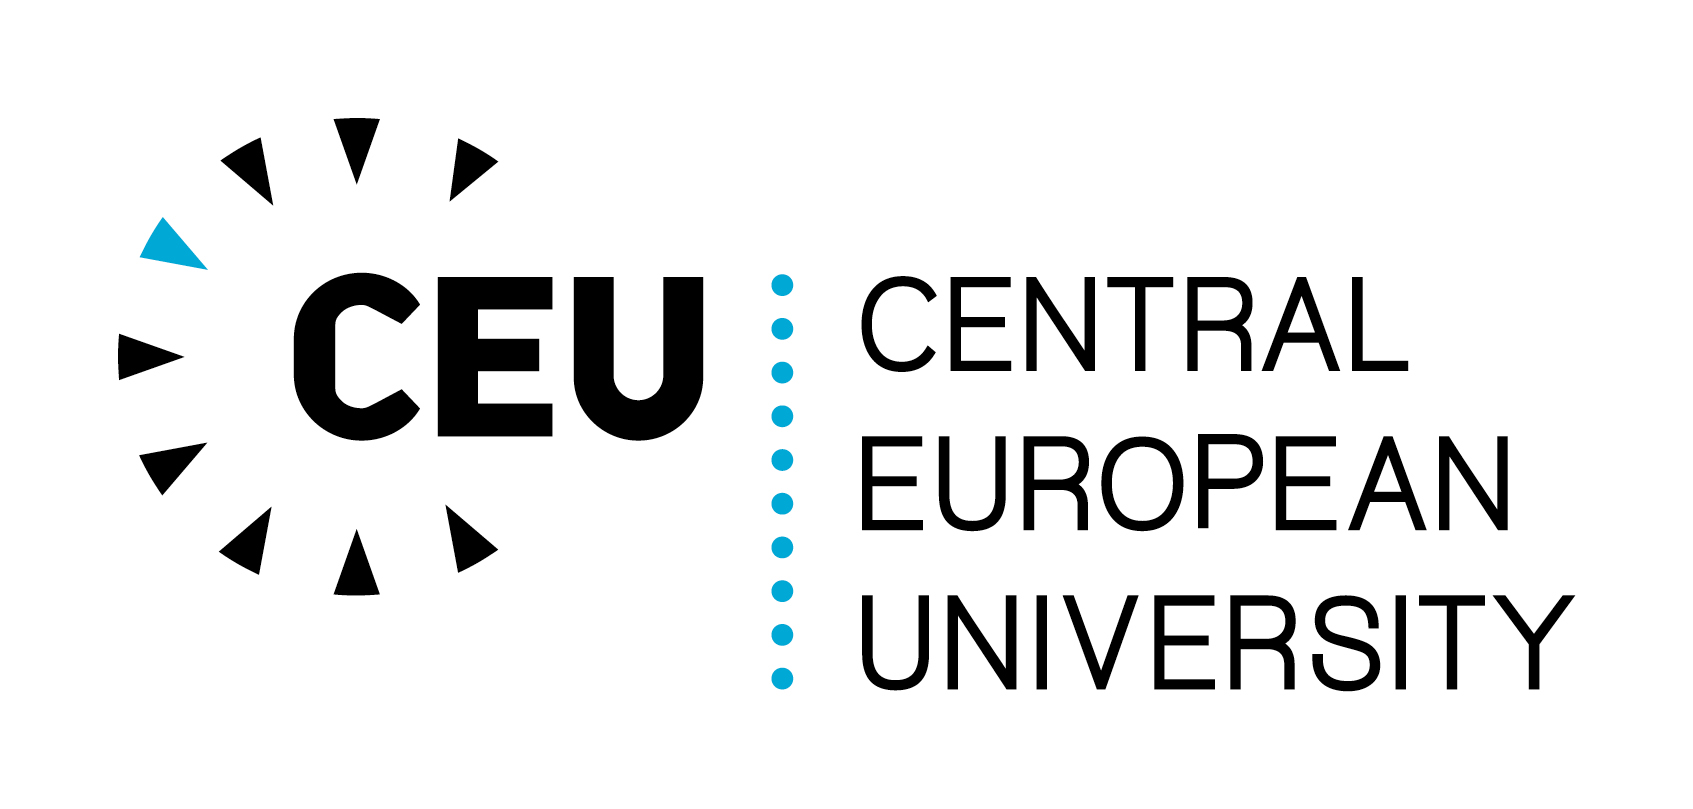 16 Astonishing Facts About Central European University - Facts.net